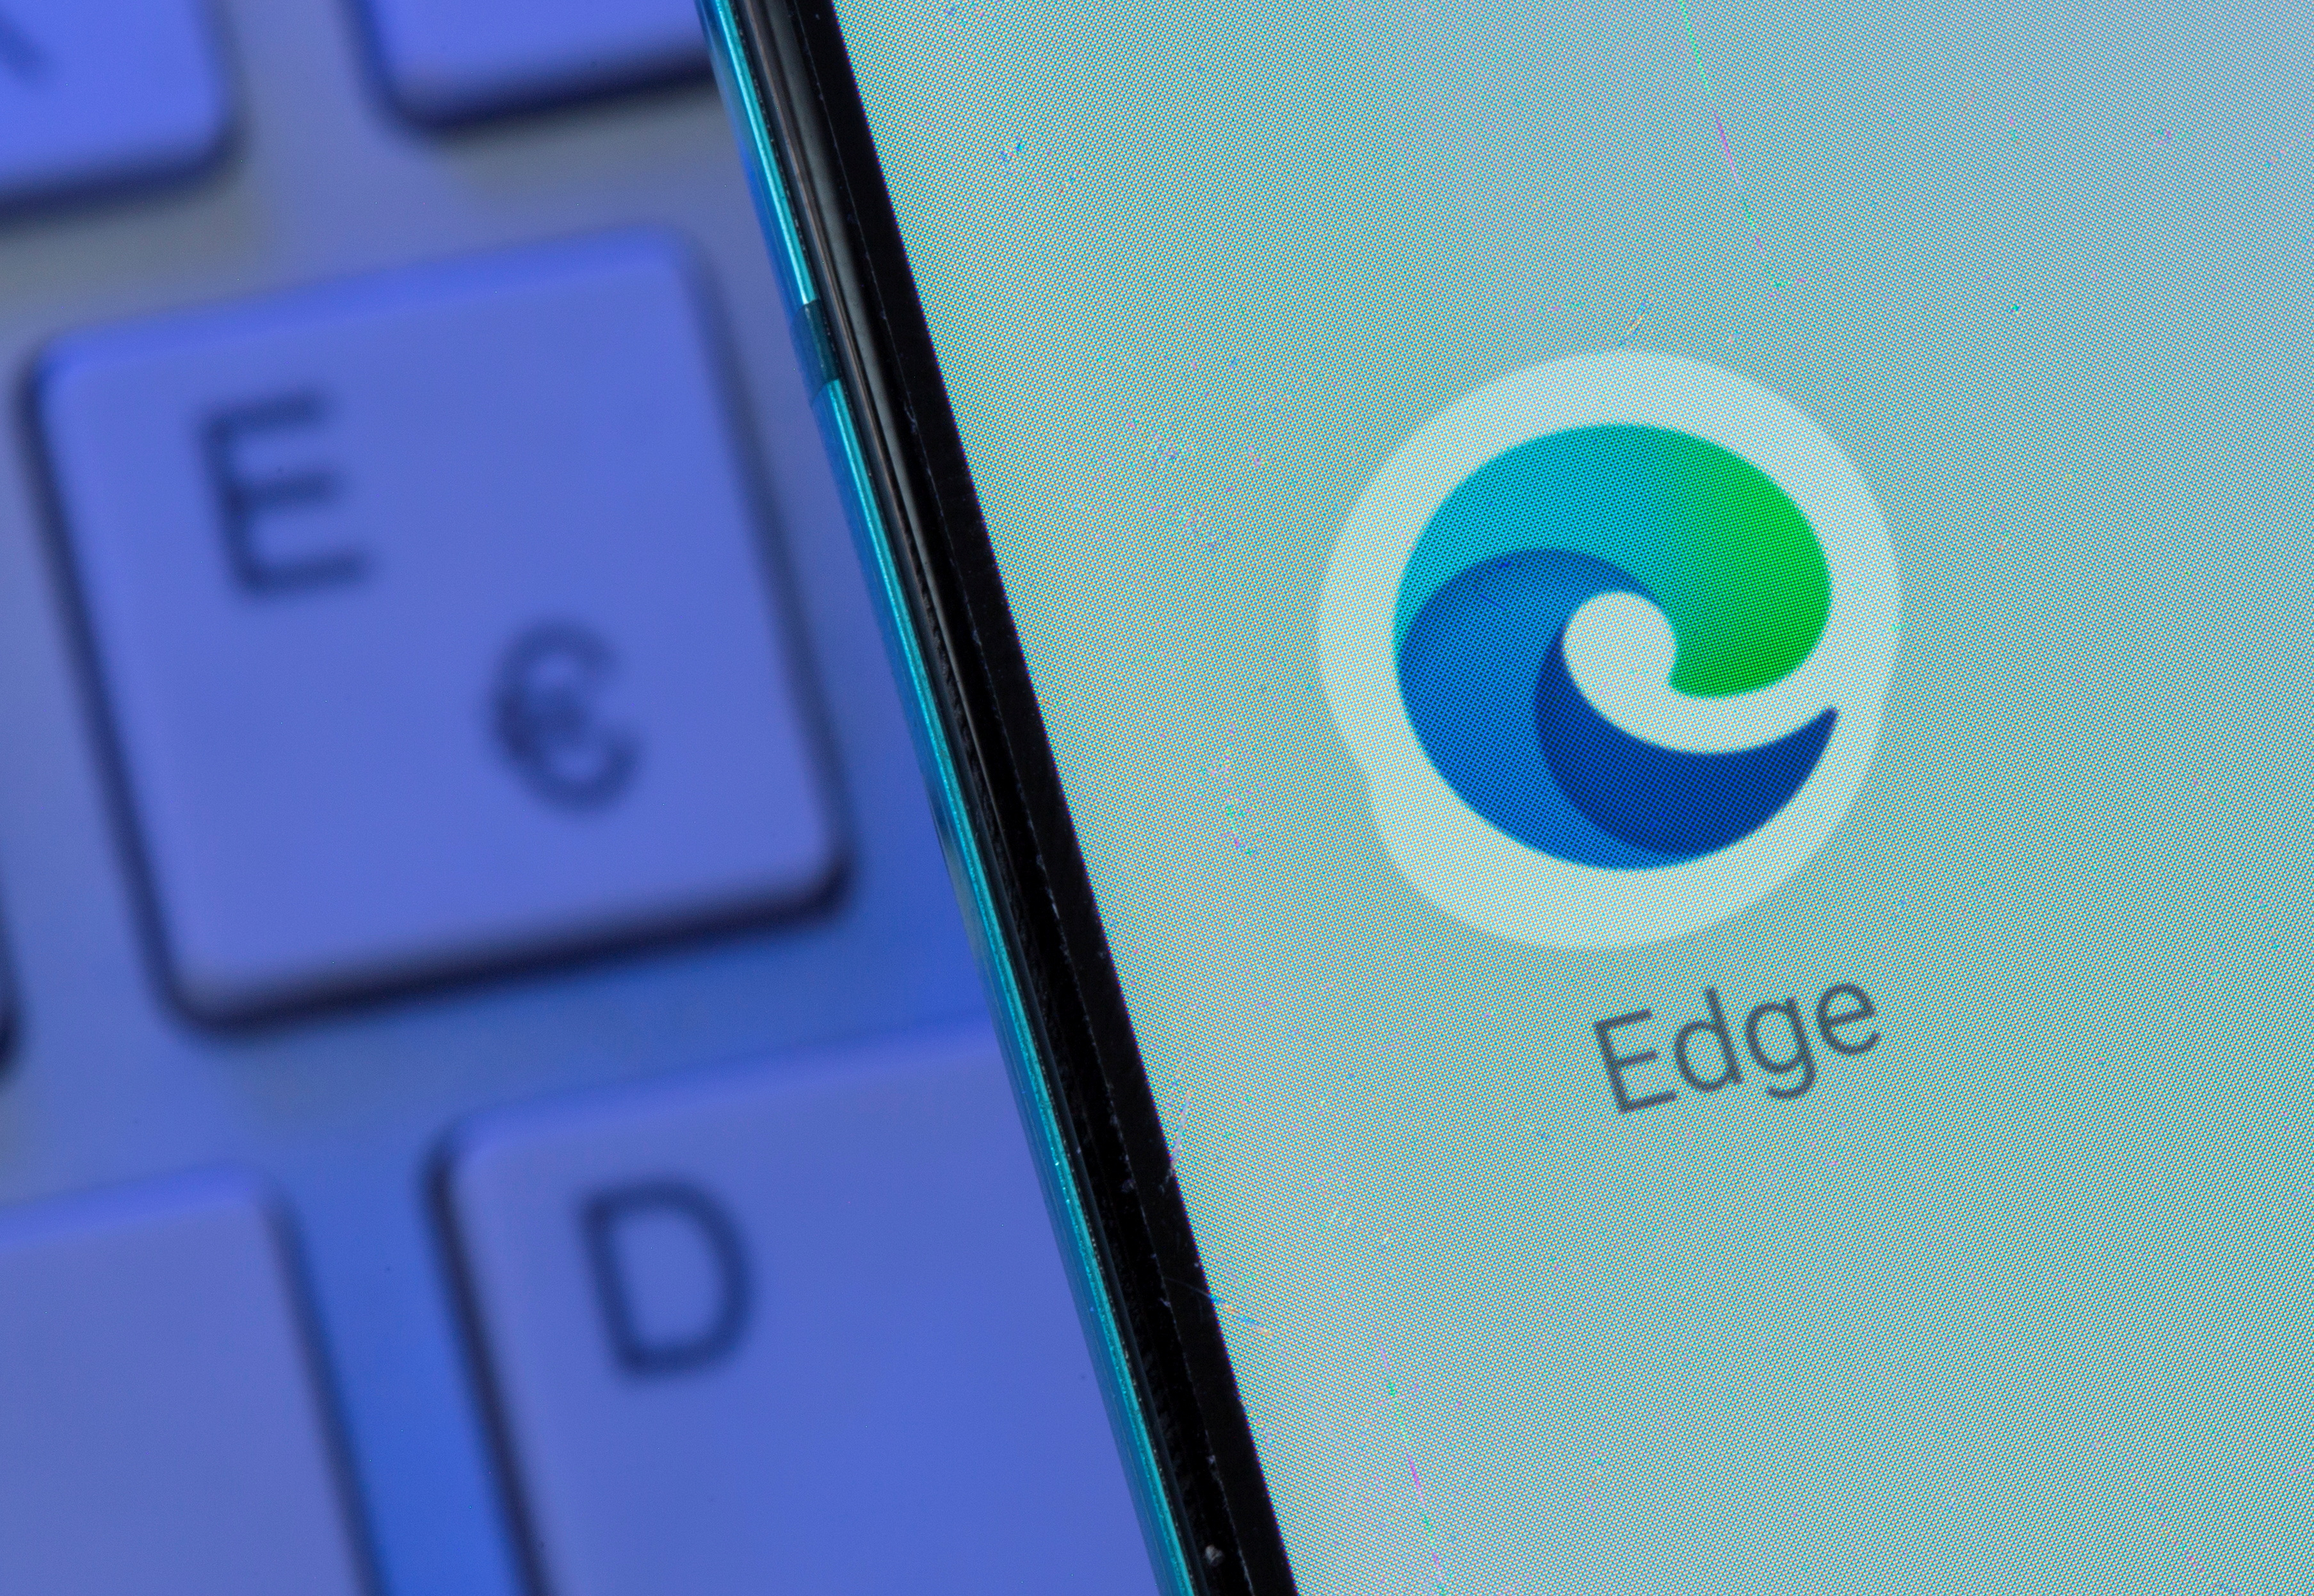 Microsoft Edge has almost replaced Apple's Safari as the most used